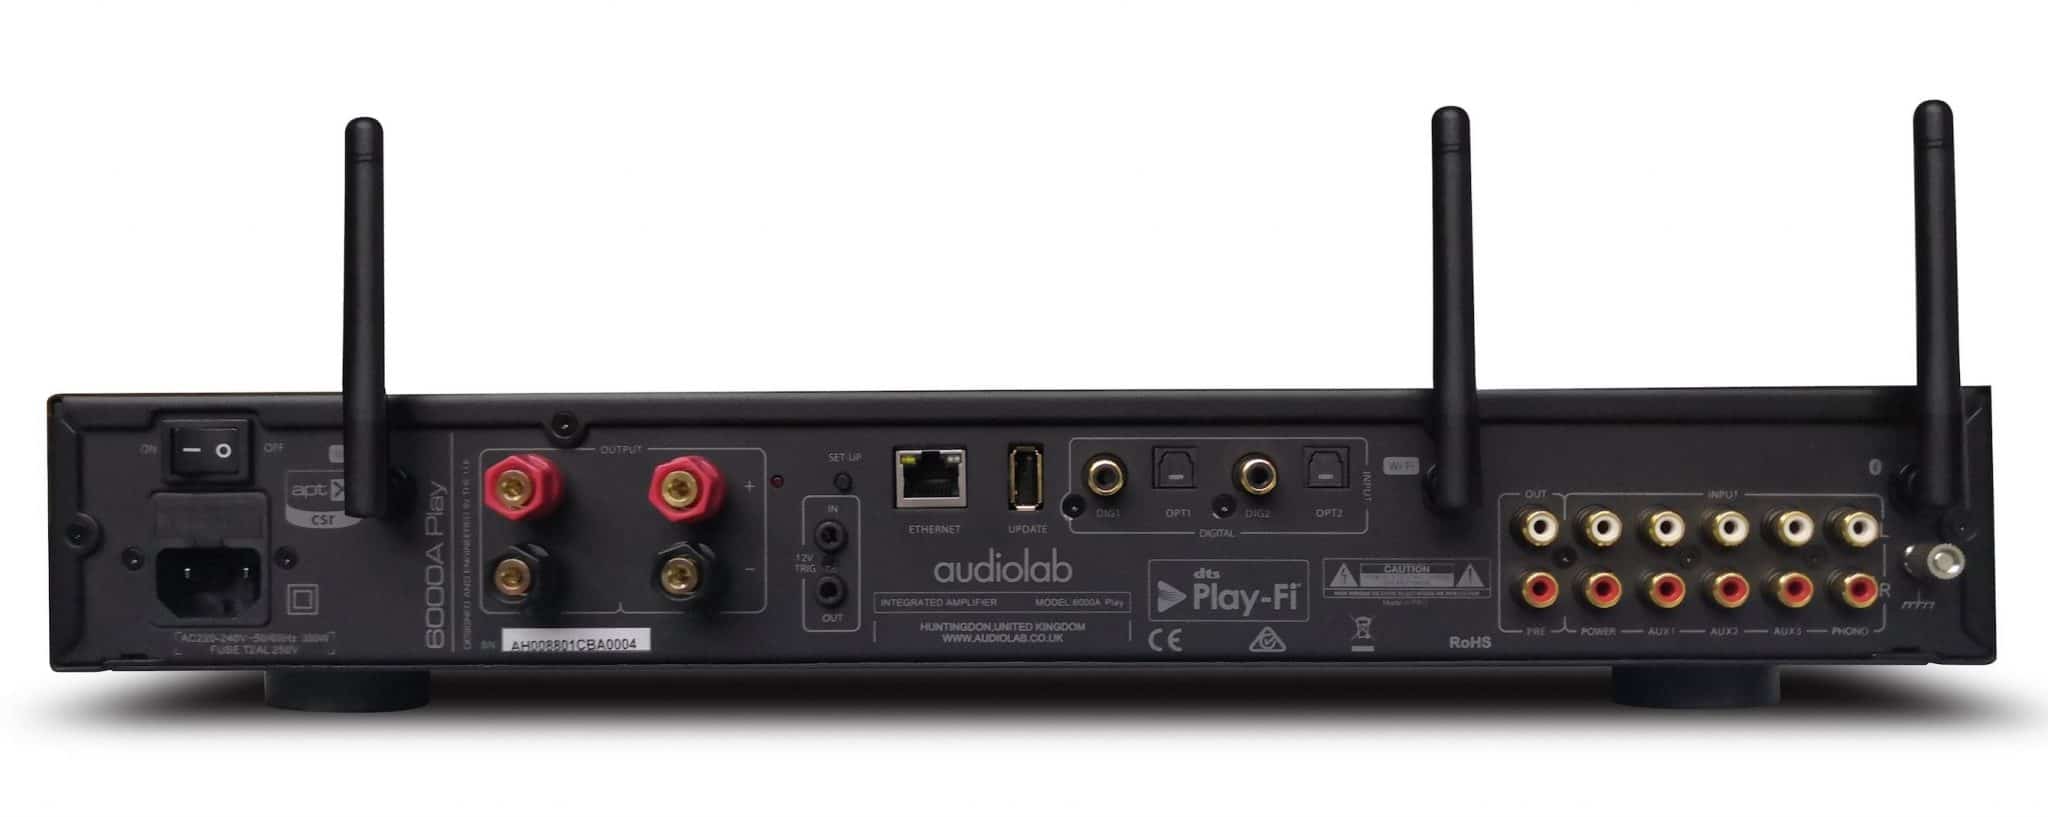 6000A Play streaming amp from Audiolab